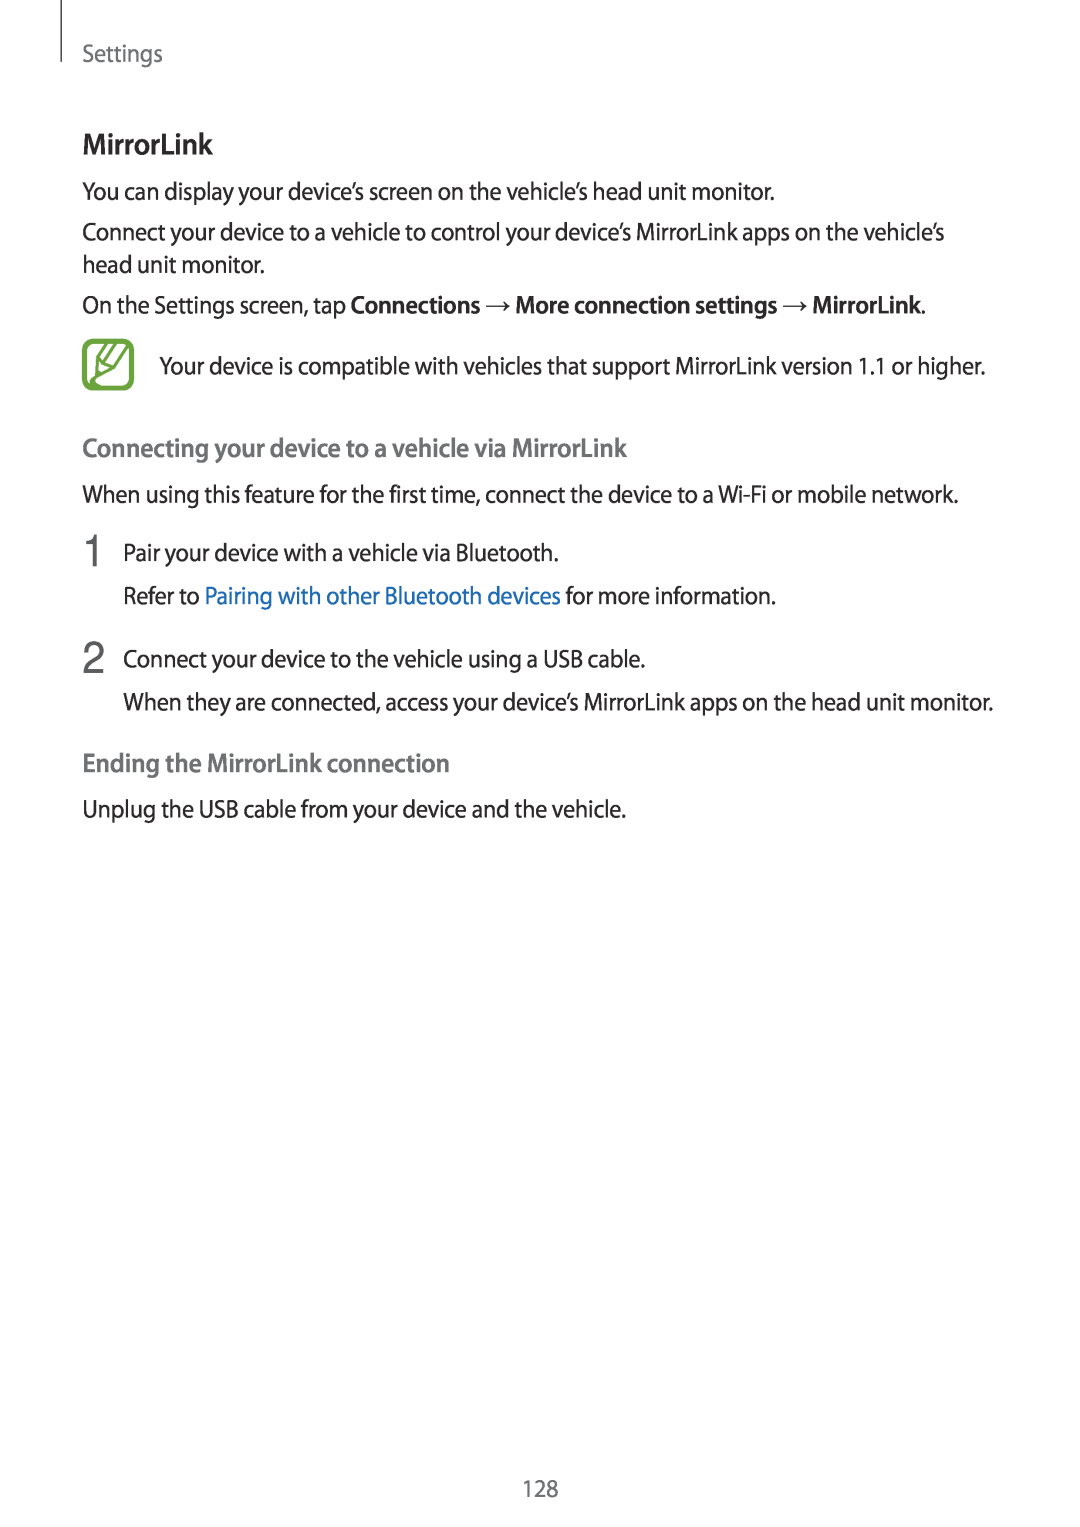 Samsung SM-A320FZINXEF Connecting your device to a vehicle via MirrorLink, Ending the MirrorLink connection, Settings 